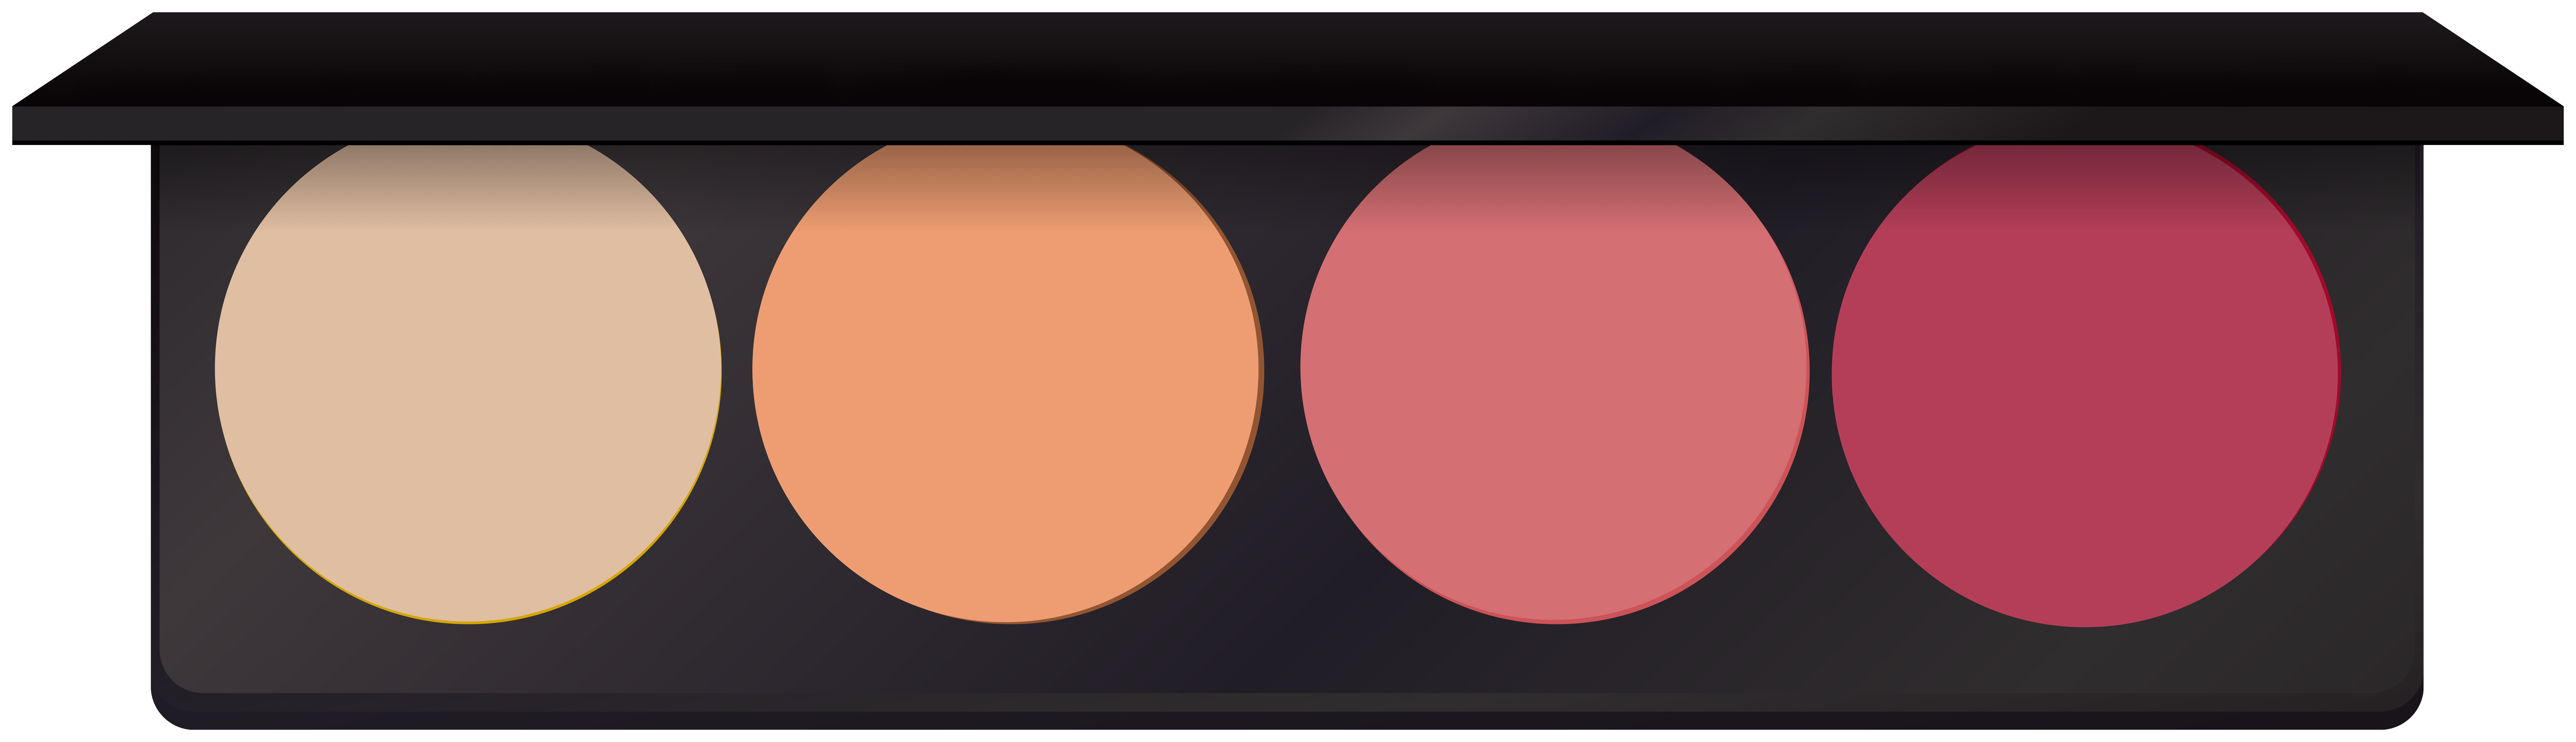 makeup-palette-png-png-image-collection